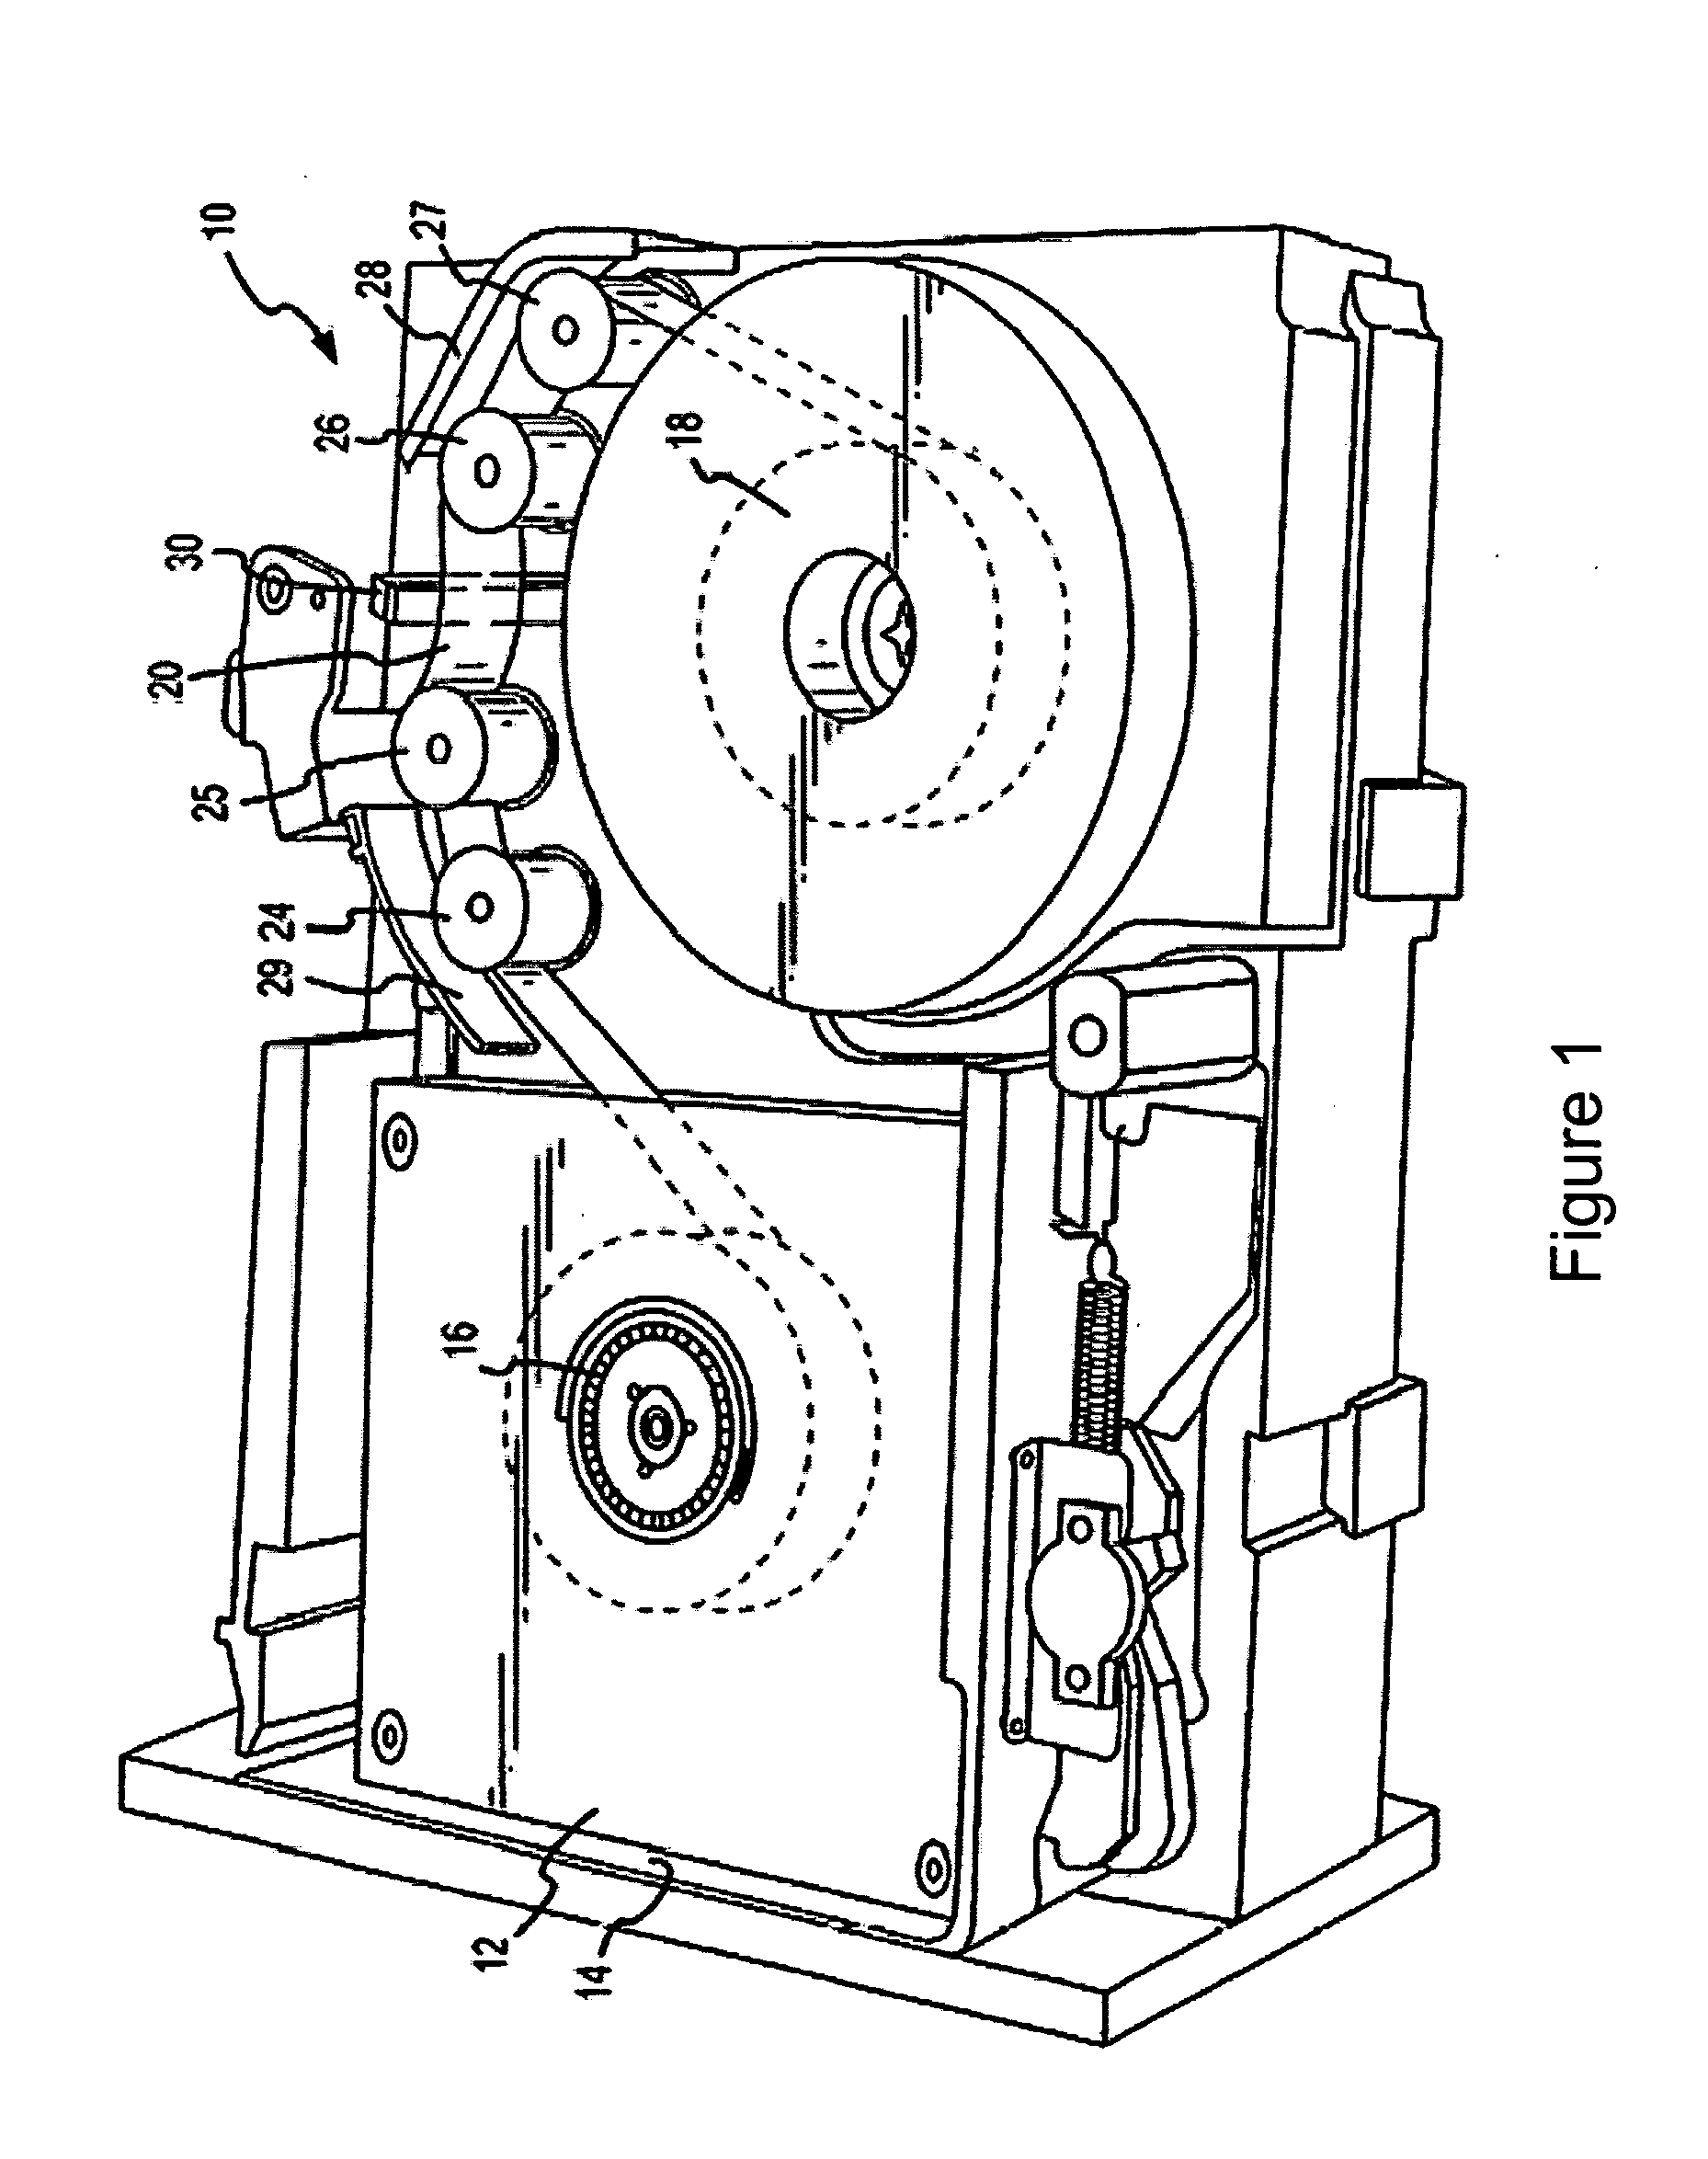 Multi-format thinfilm head and associated methods